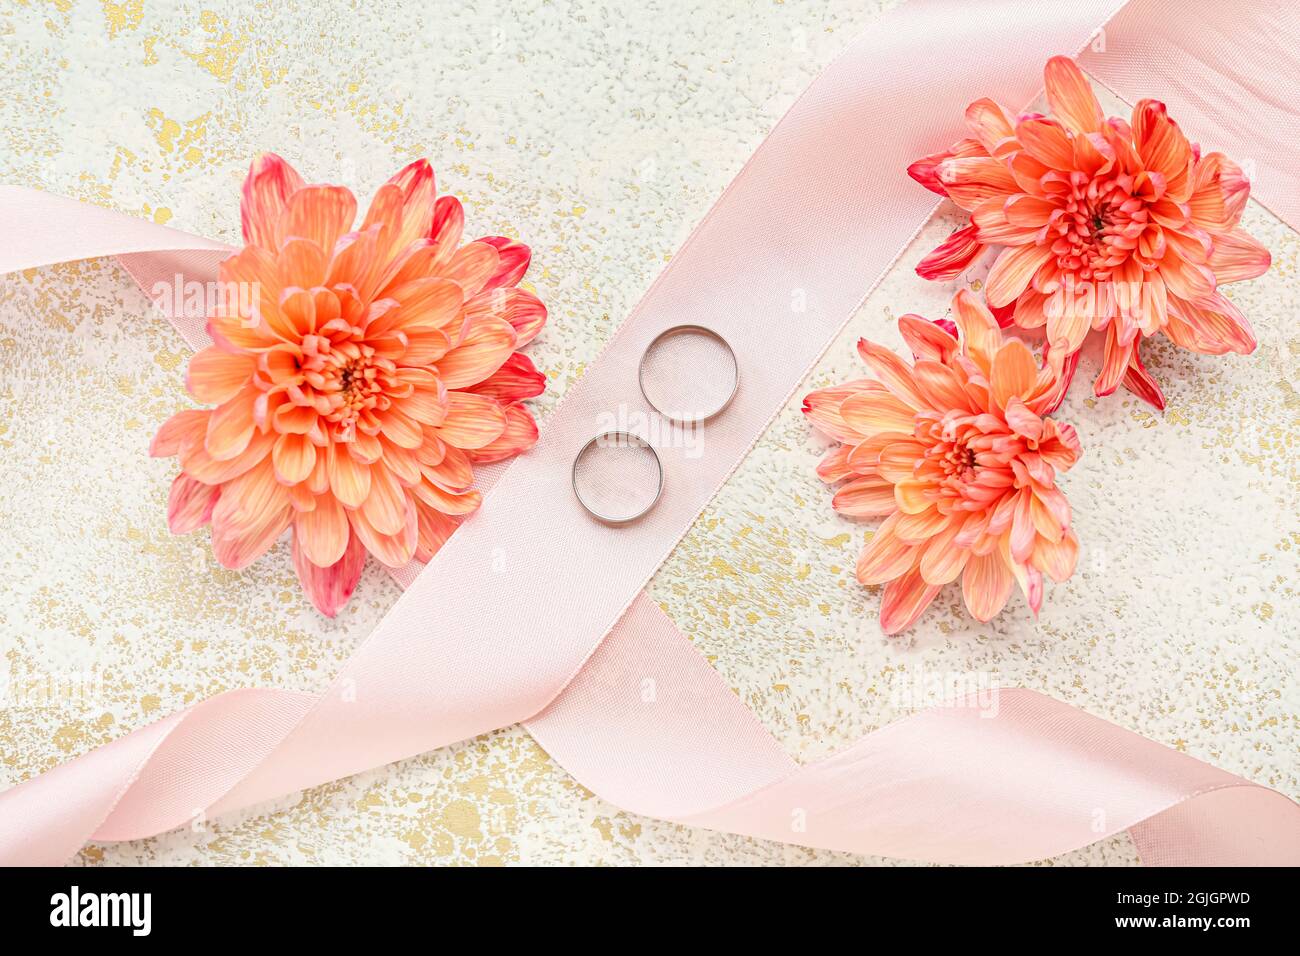 Pair of wedding rings, ribbon and beautiful flowers on color background Stock Photo